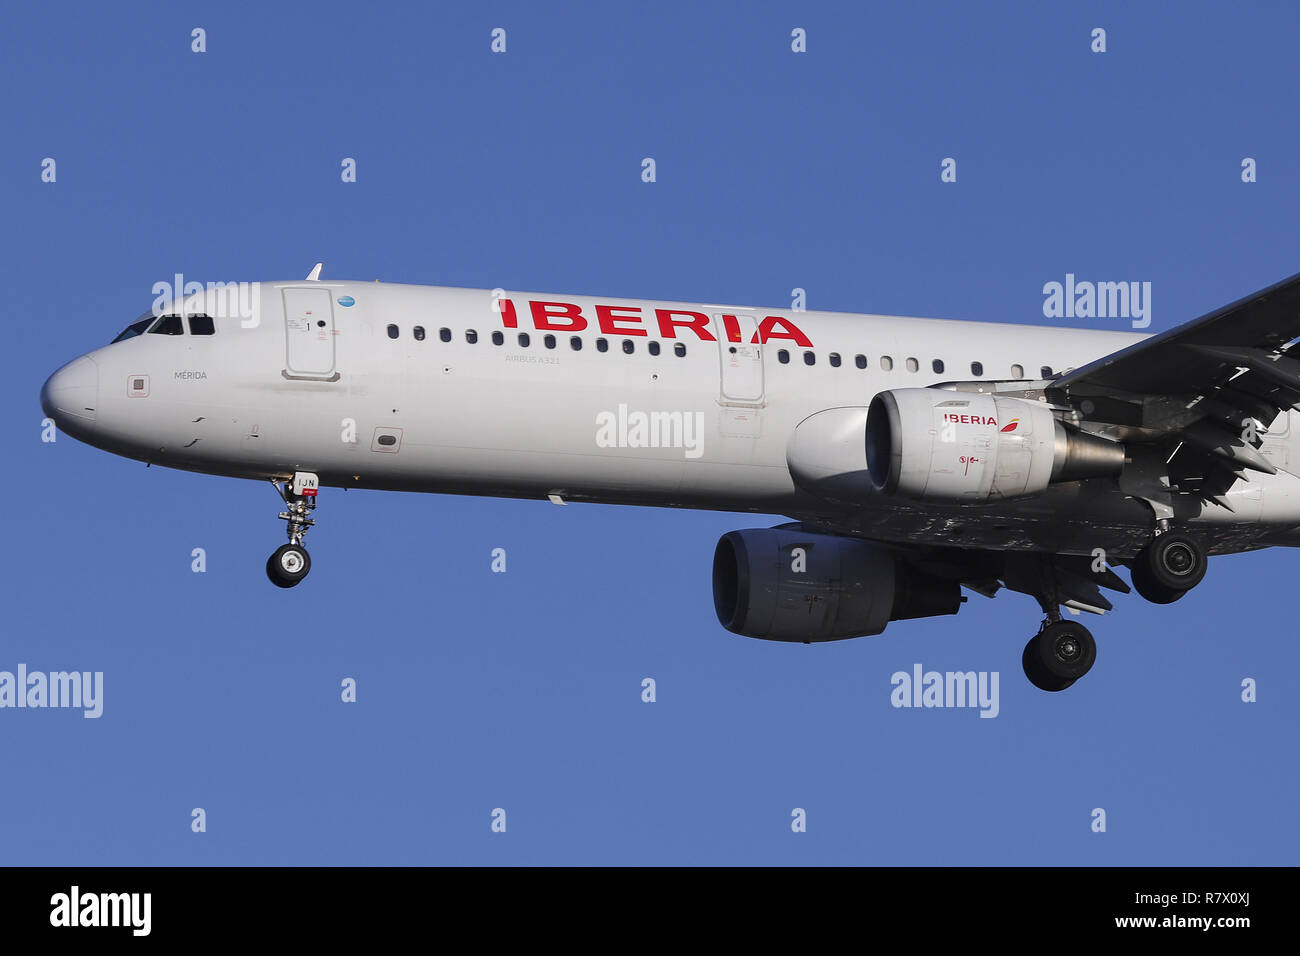 November 30, 2018 - United Kingdom - Iberia Airbus A321-200 airplane is  seen landing at the London Heathrow airport in England..The aircraft has  the name MÃ©rida with configuration of 200 economy seats,